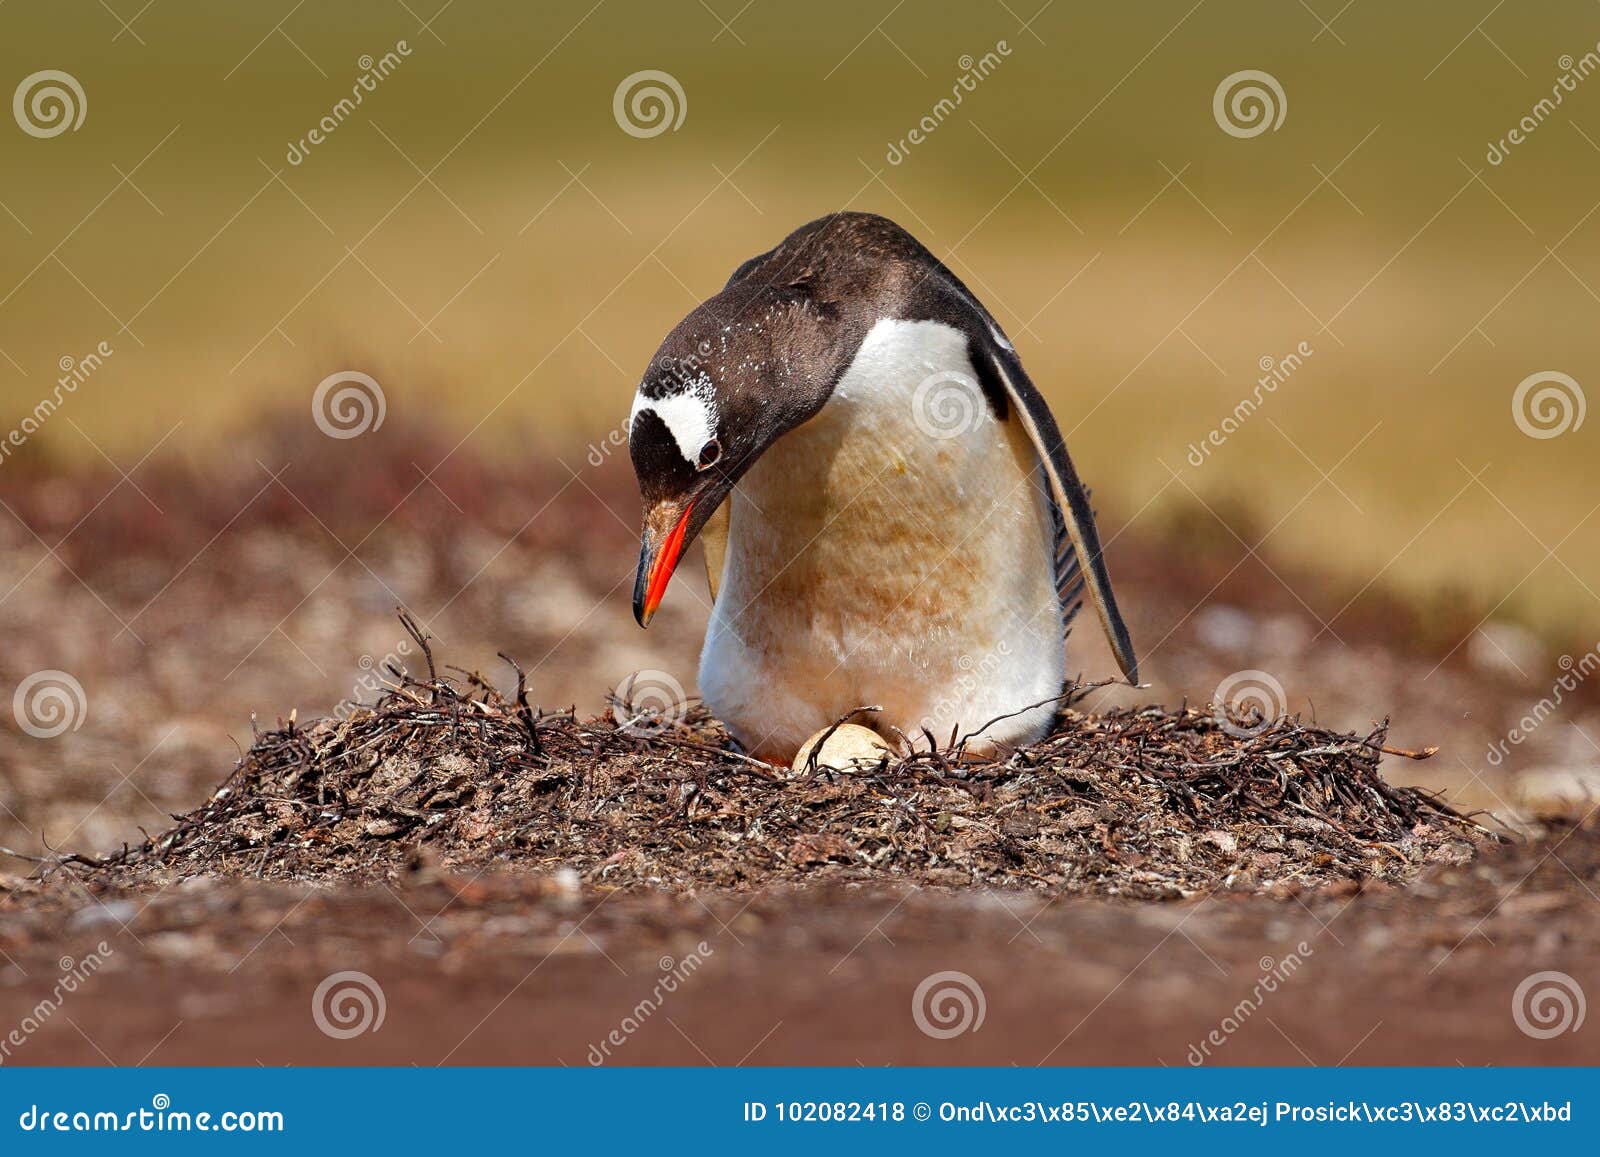 nesting penguin on the meadow. gentoo penguin in the nest wit two eggs, falkland islands. animal behaviour, bird in the nest with